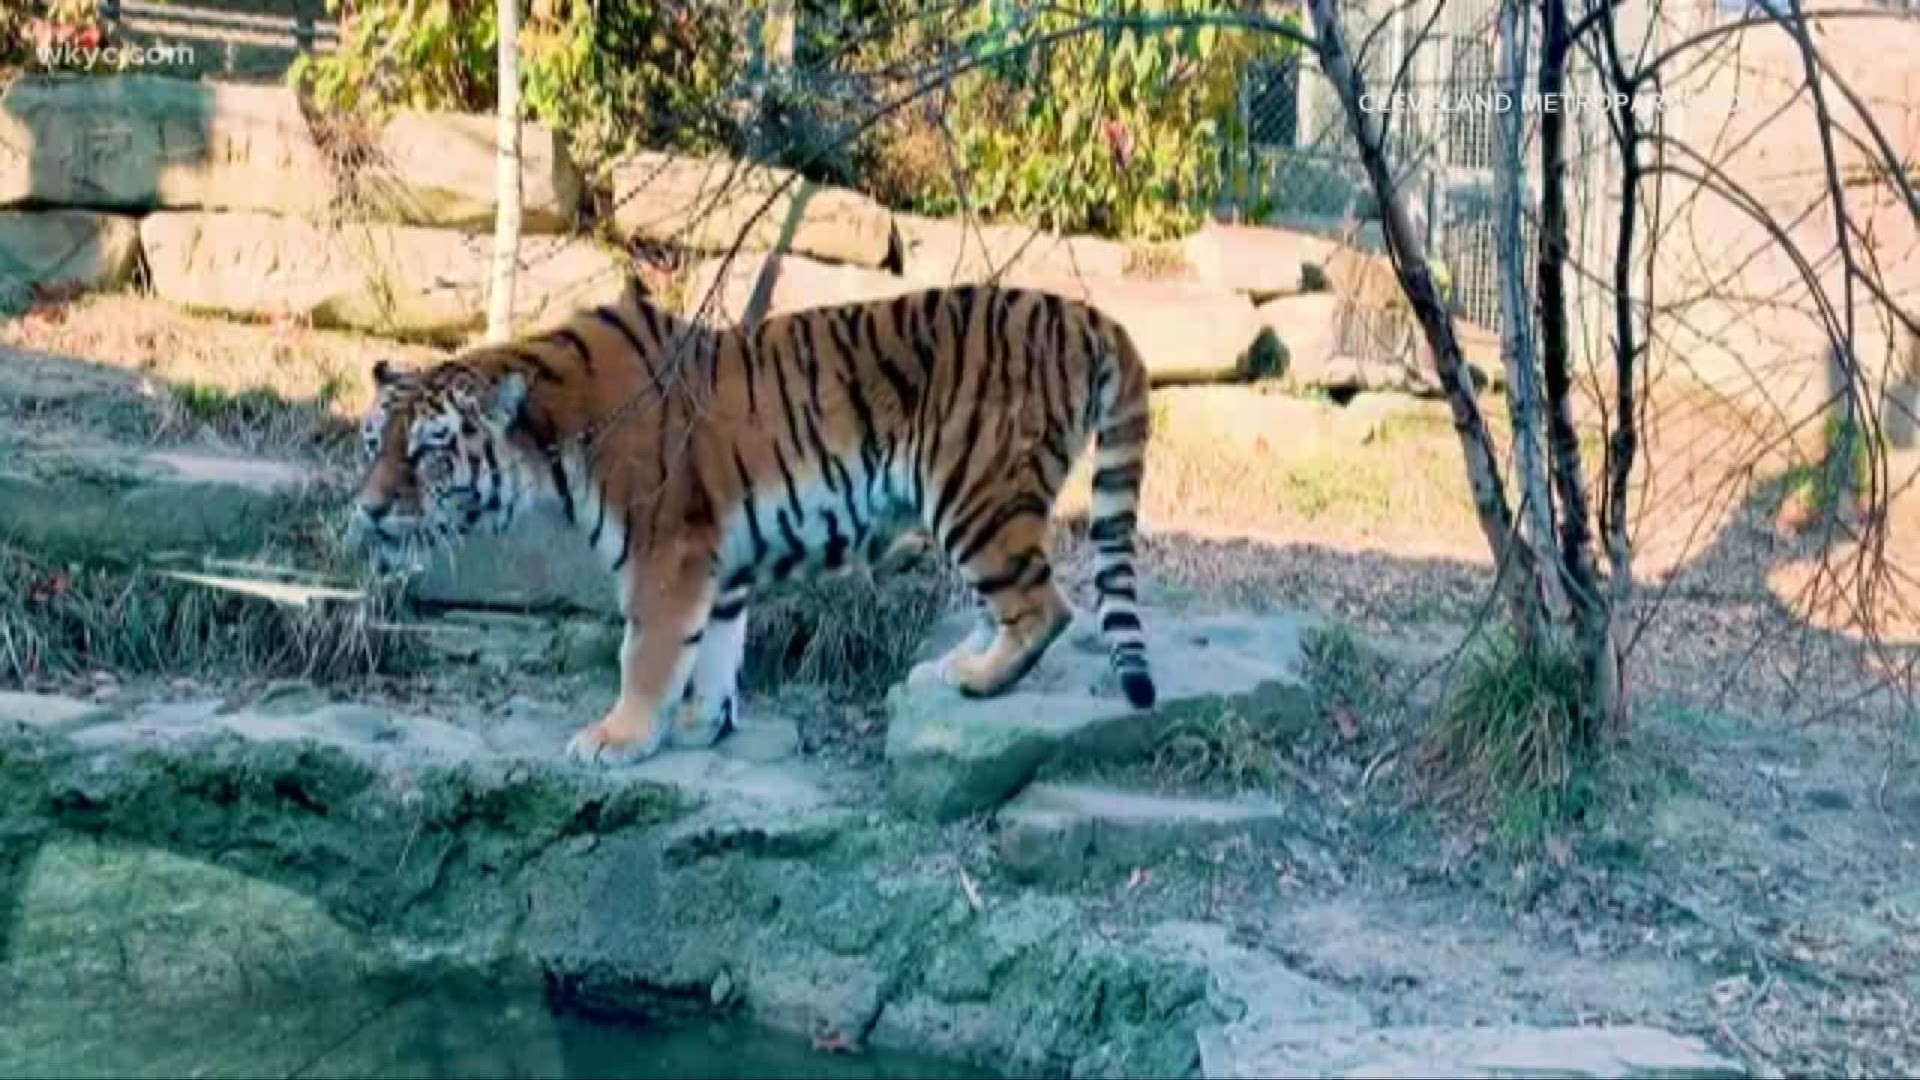 An Amur tiger named Zoya and two Mexican grey wolves are now at the zoo. Zoya came from a zoo in Denmark and will be gradually introduced to the zoo's other tigers.